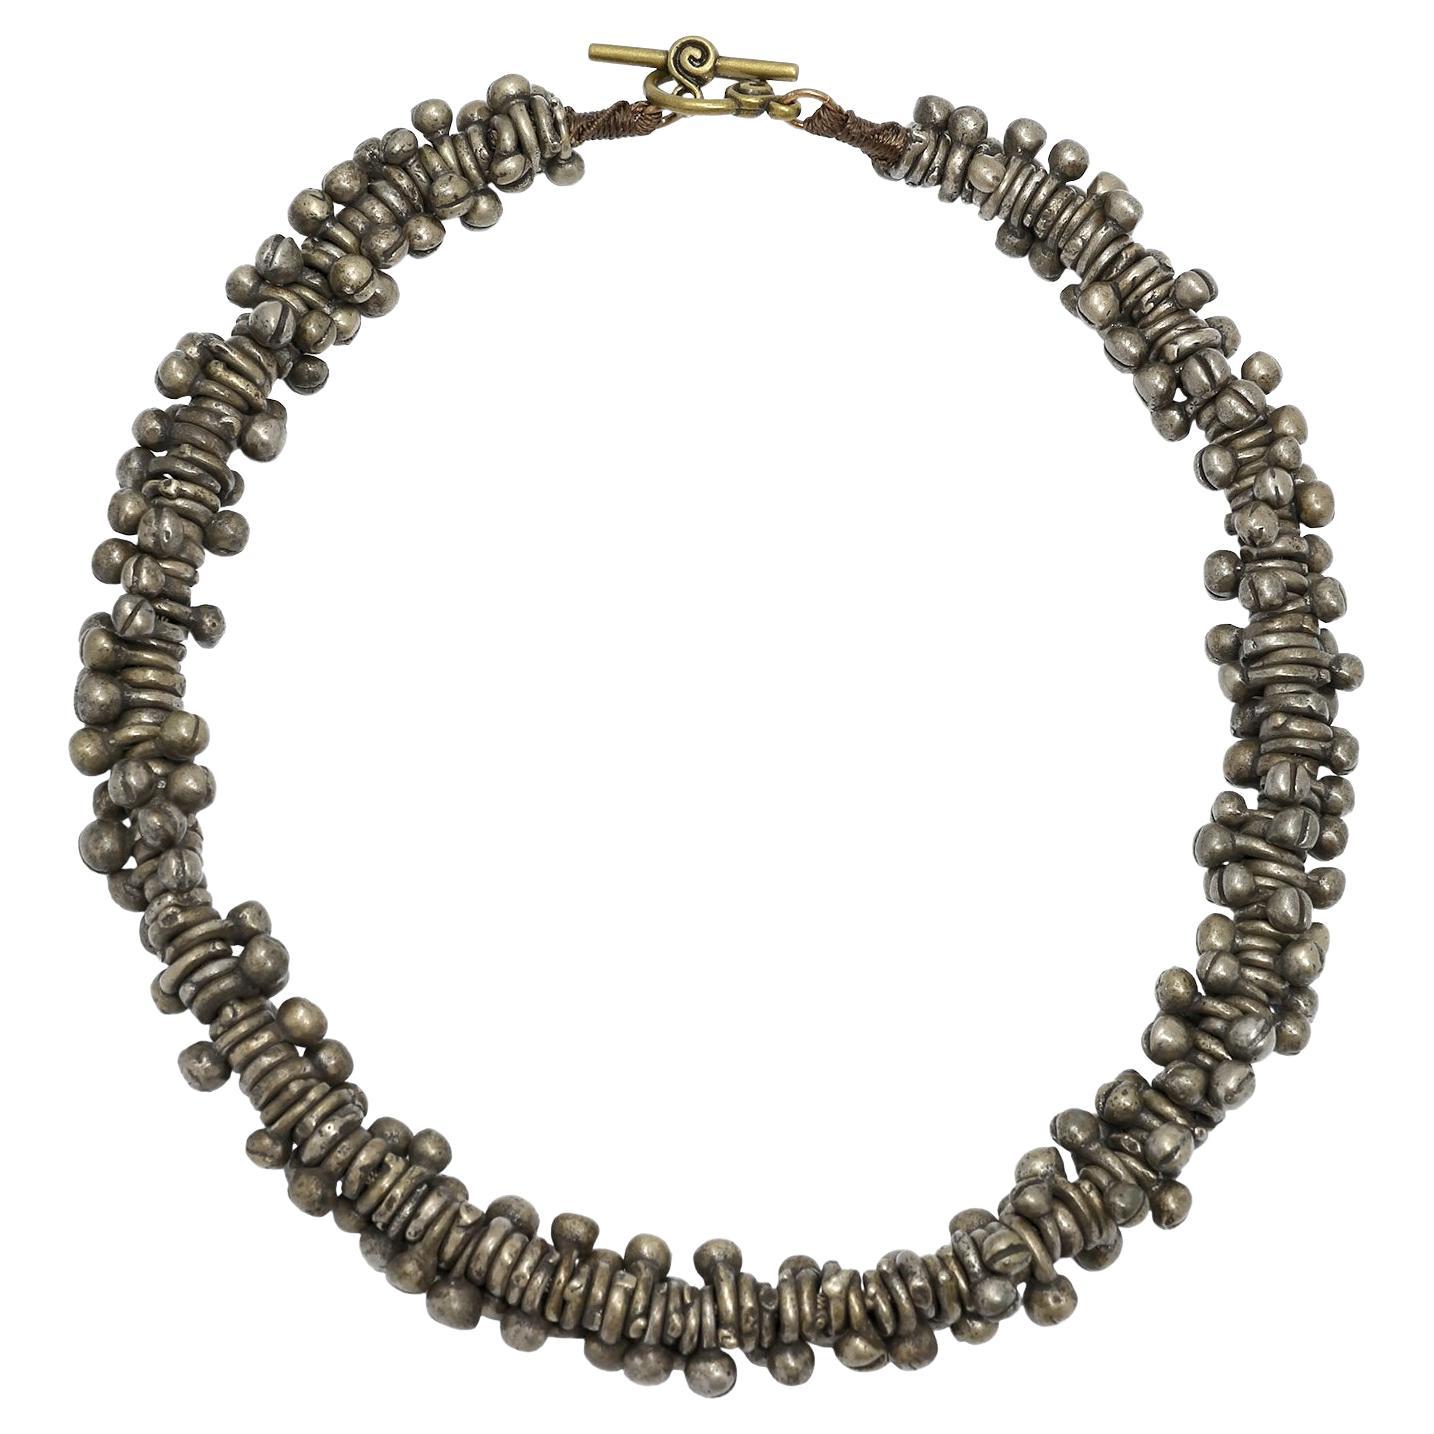 African Bug Bead Necklace, Old Hand-Cast Metal Beads